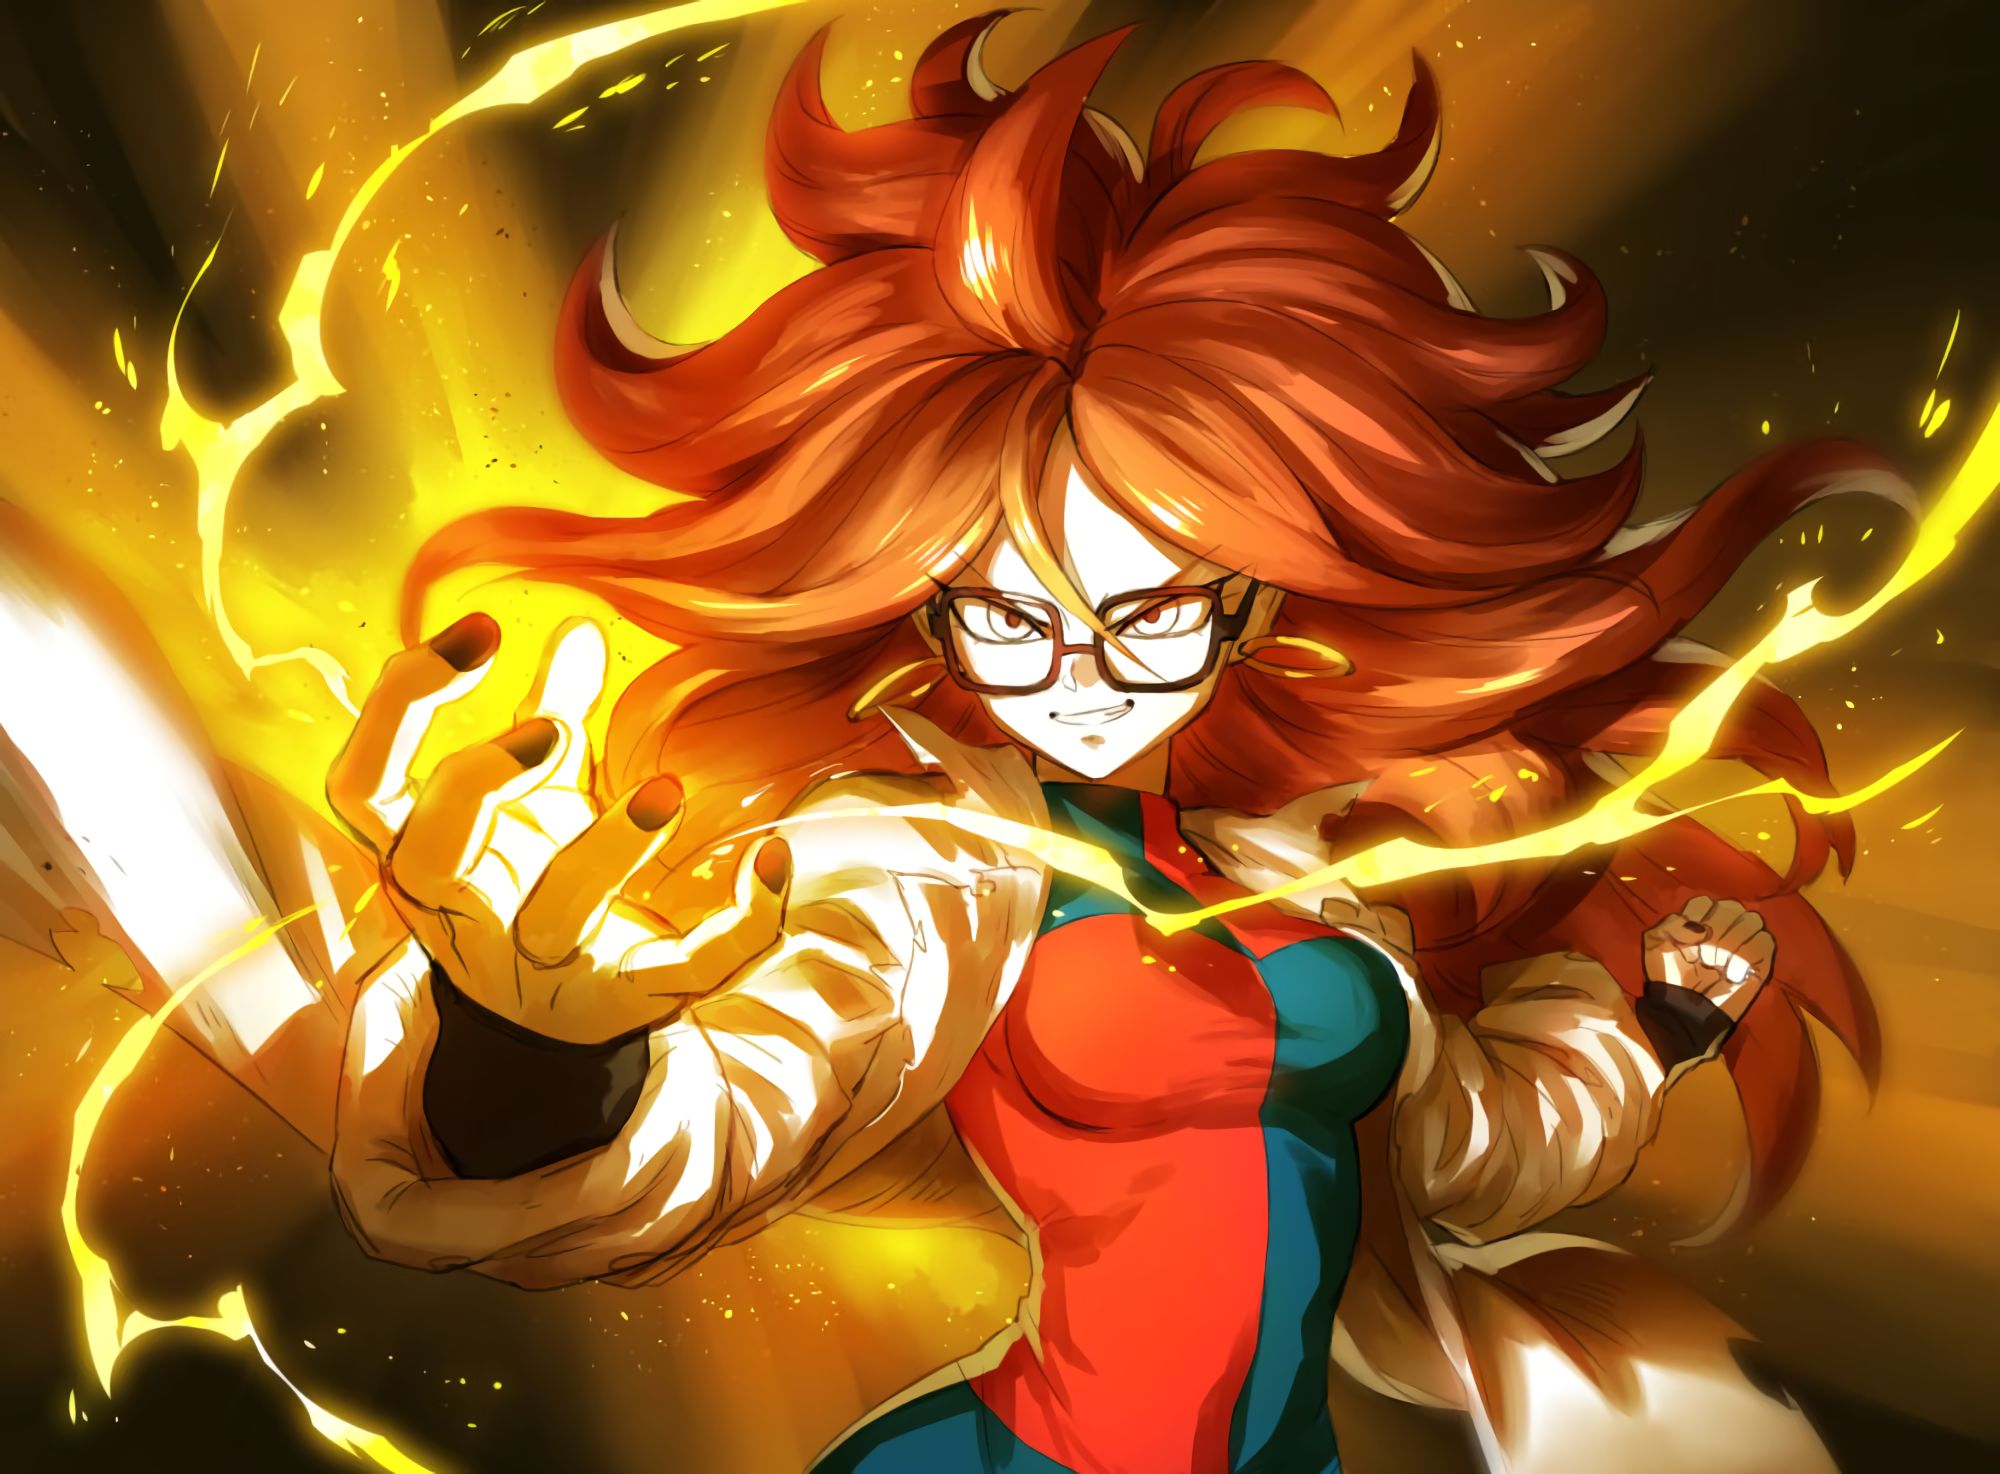 Android 21 (Dragon Ball) wallpapers for desktop, download free